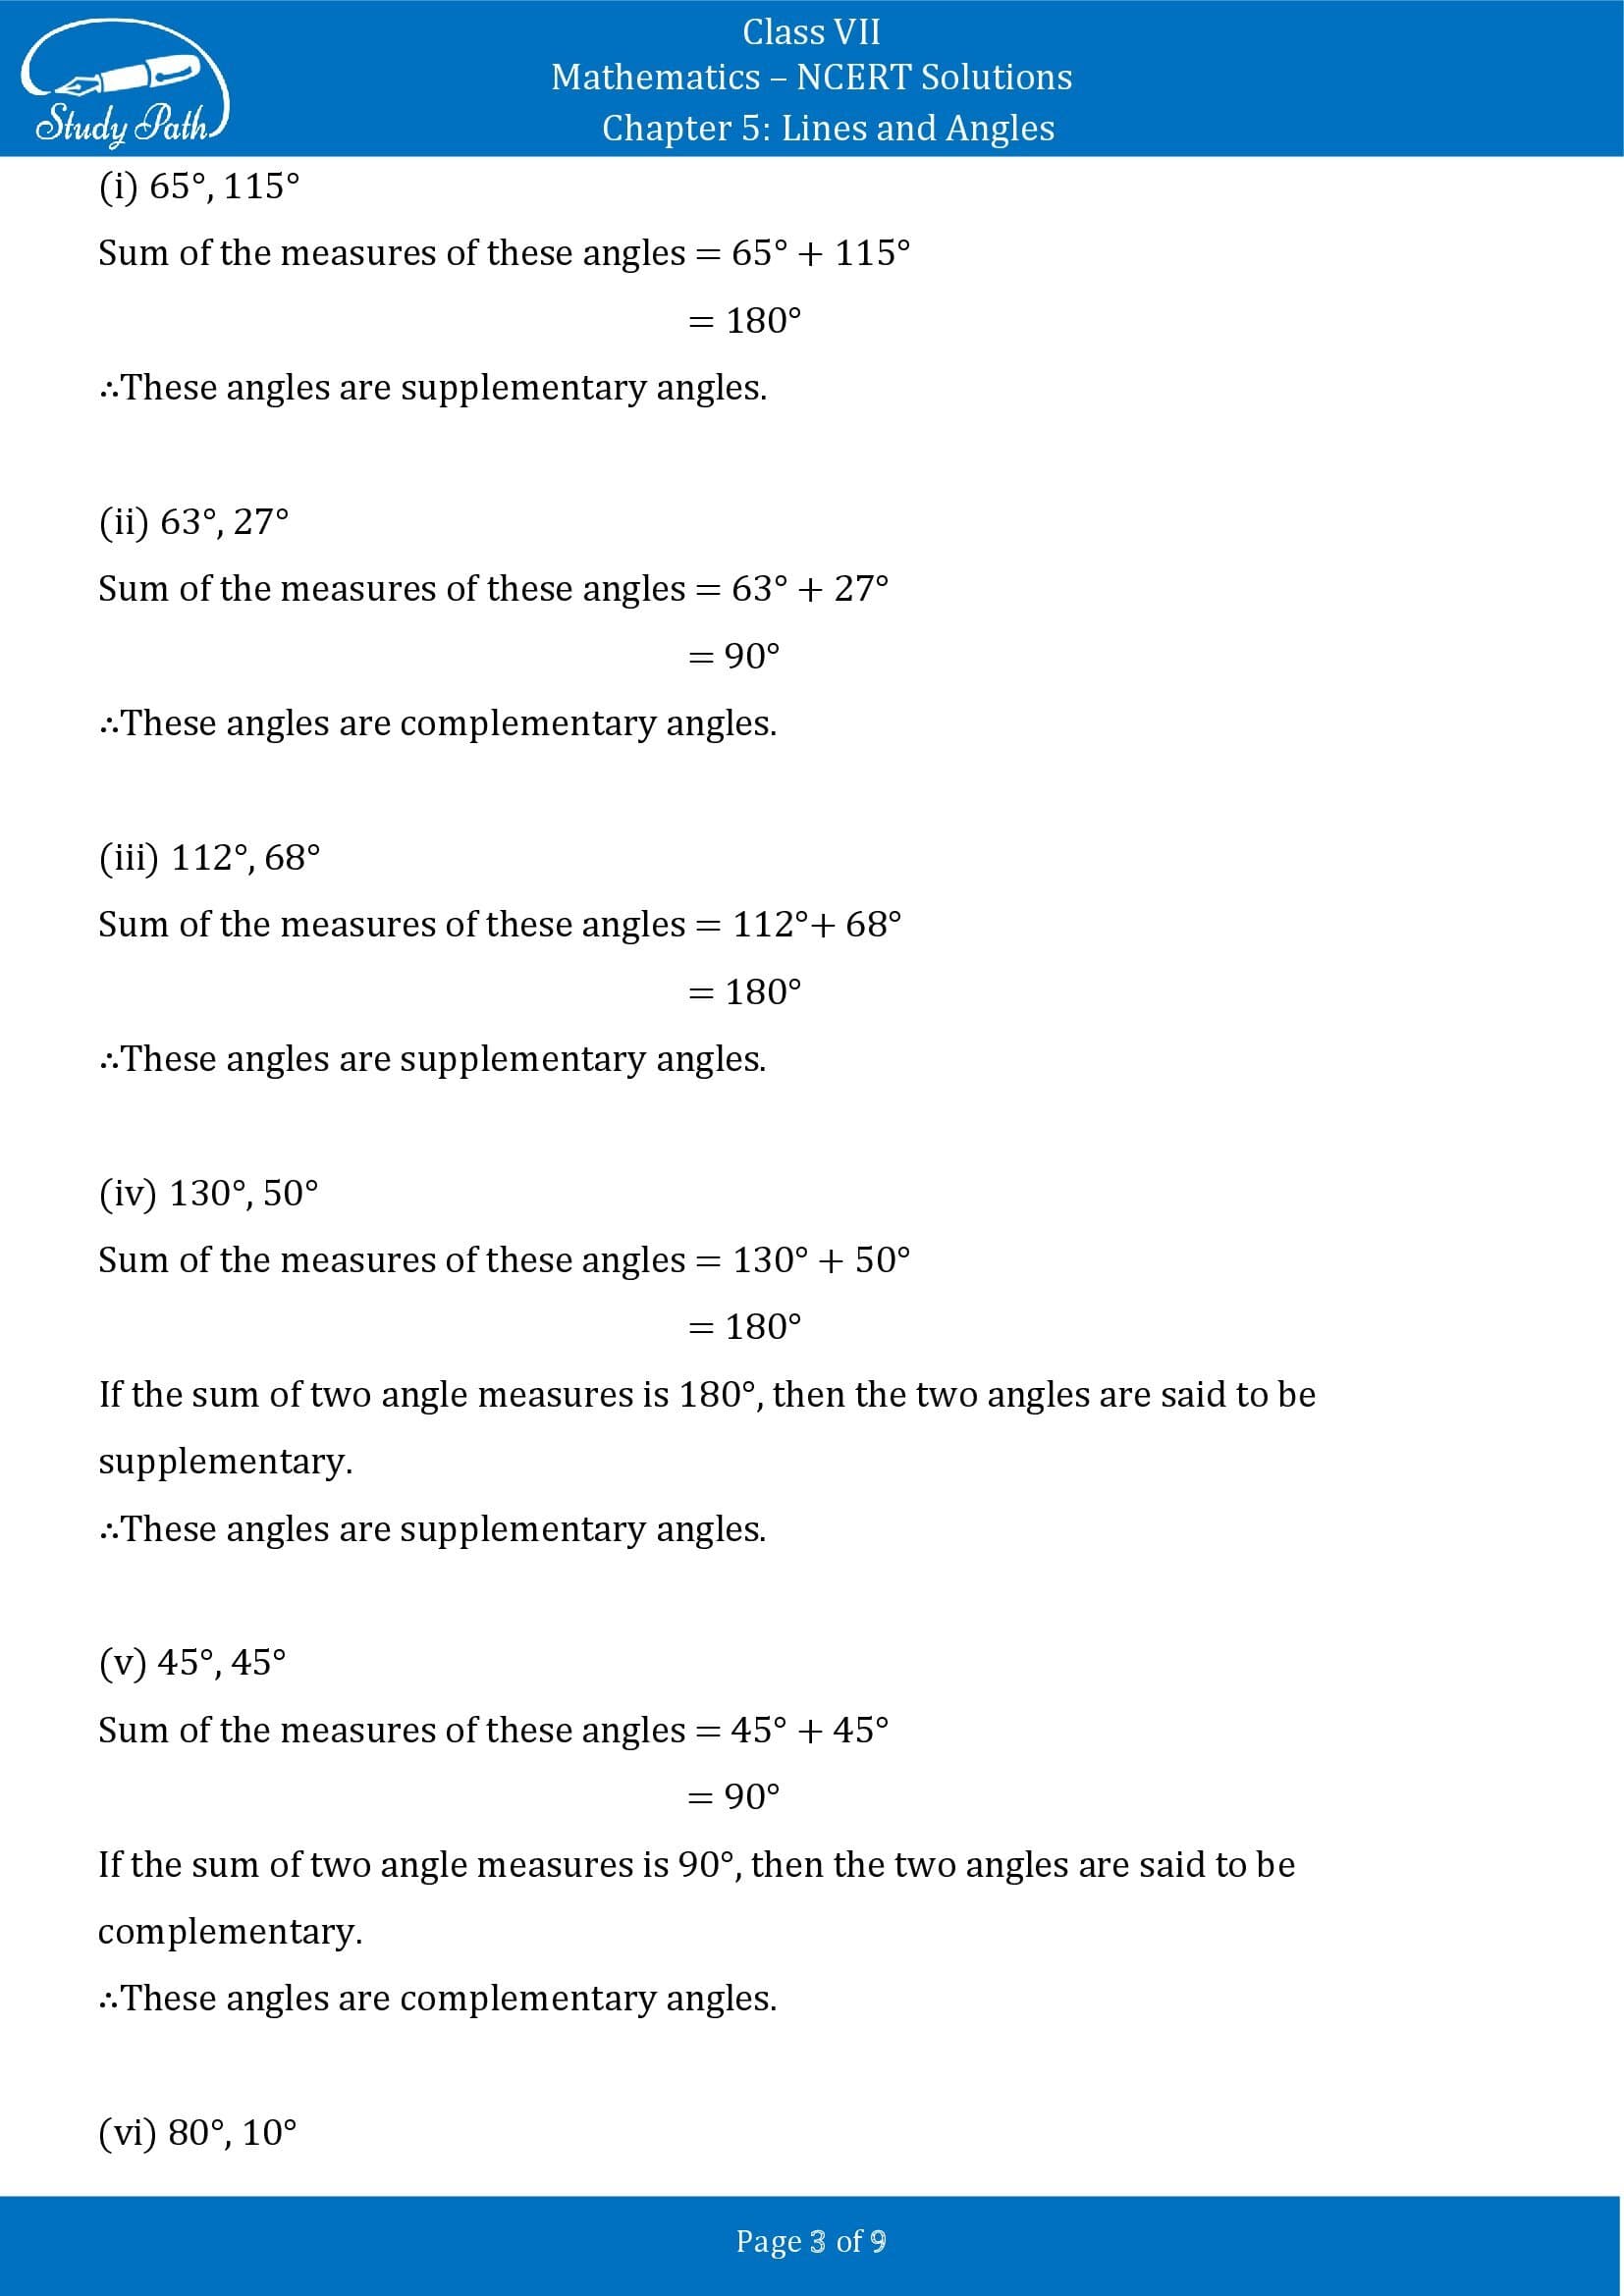 NCERT Solutions for Class 7 Maths Chapter 5 Lines and Angles Exercise 5.1 00003